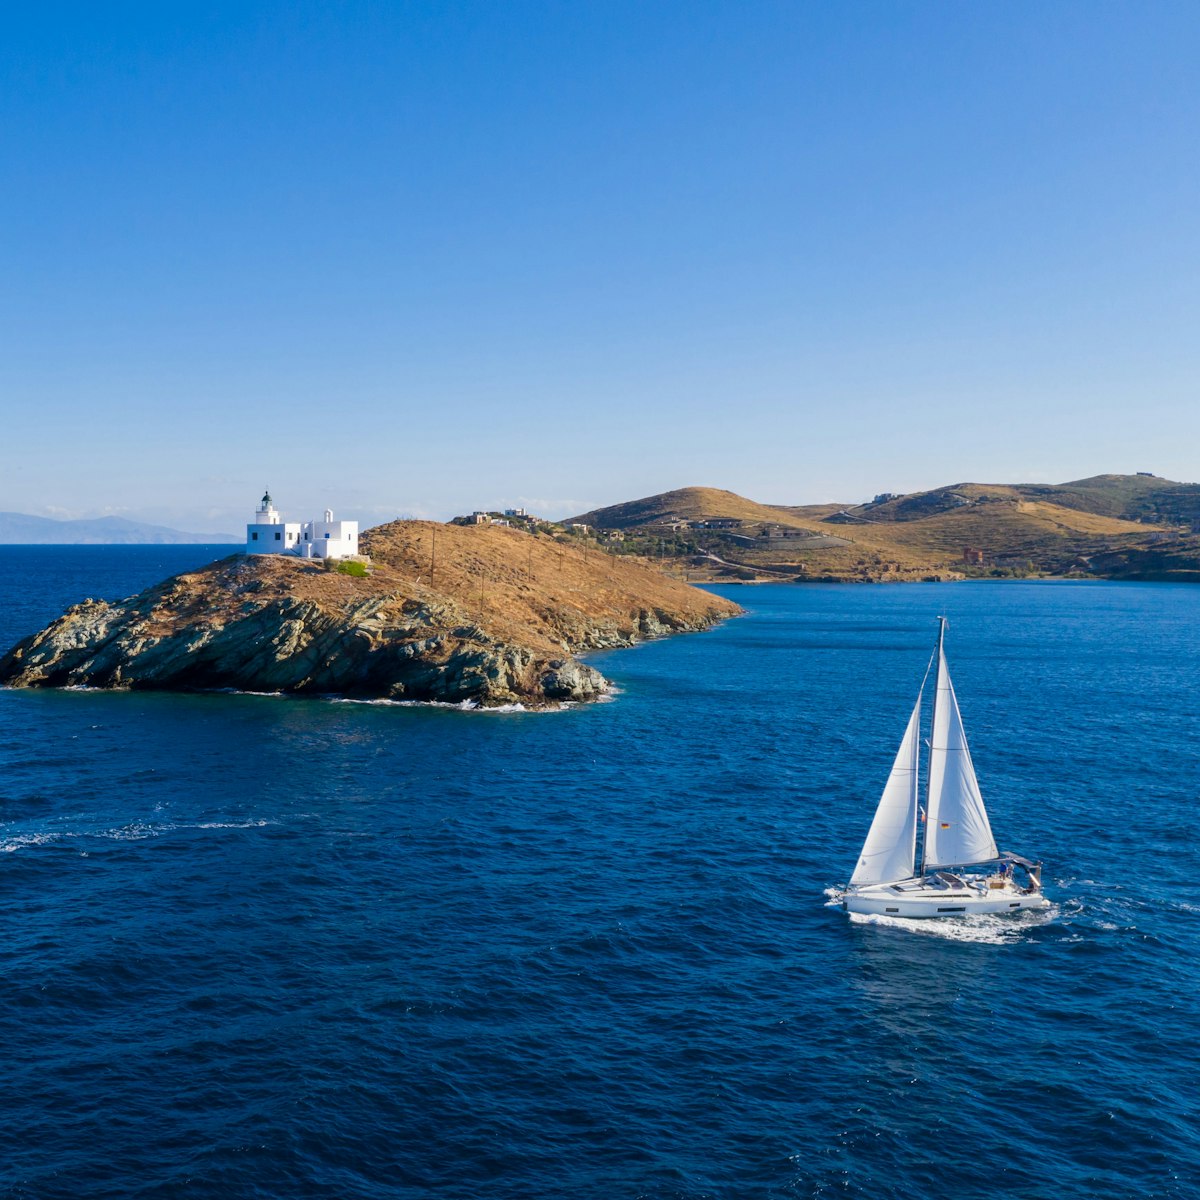 Set sail on an adventure and discover the unparalleled beauty of some of the most captivating islands situated in the Aegean and Ionian Seas.